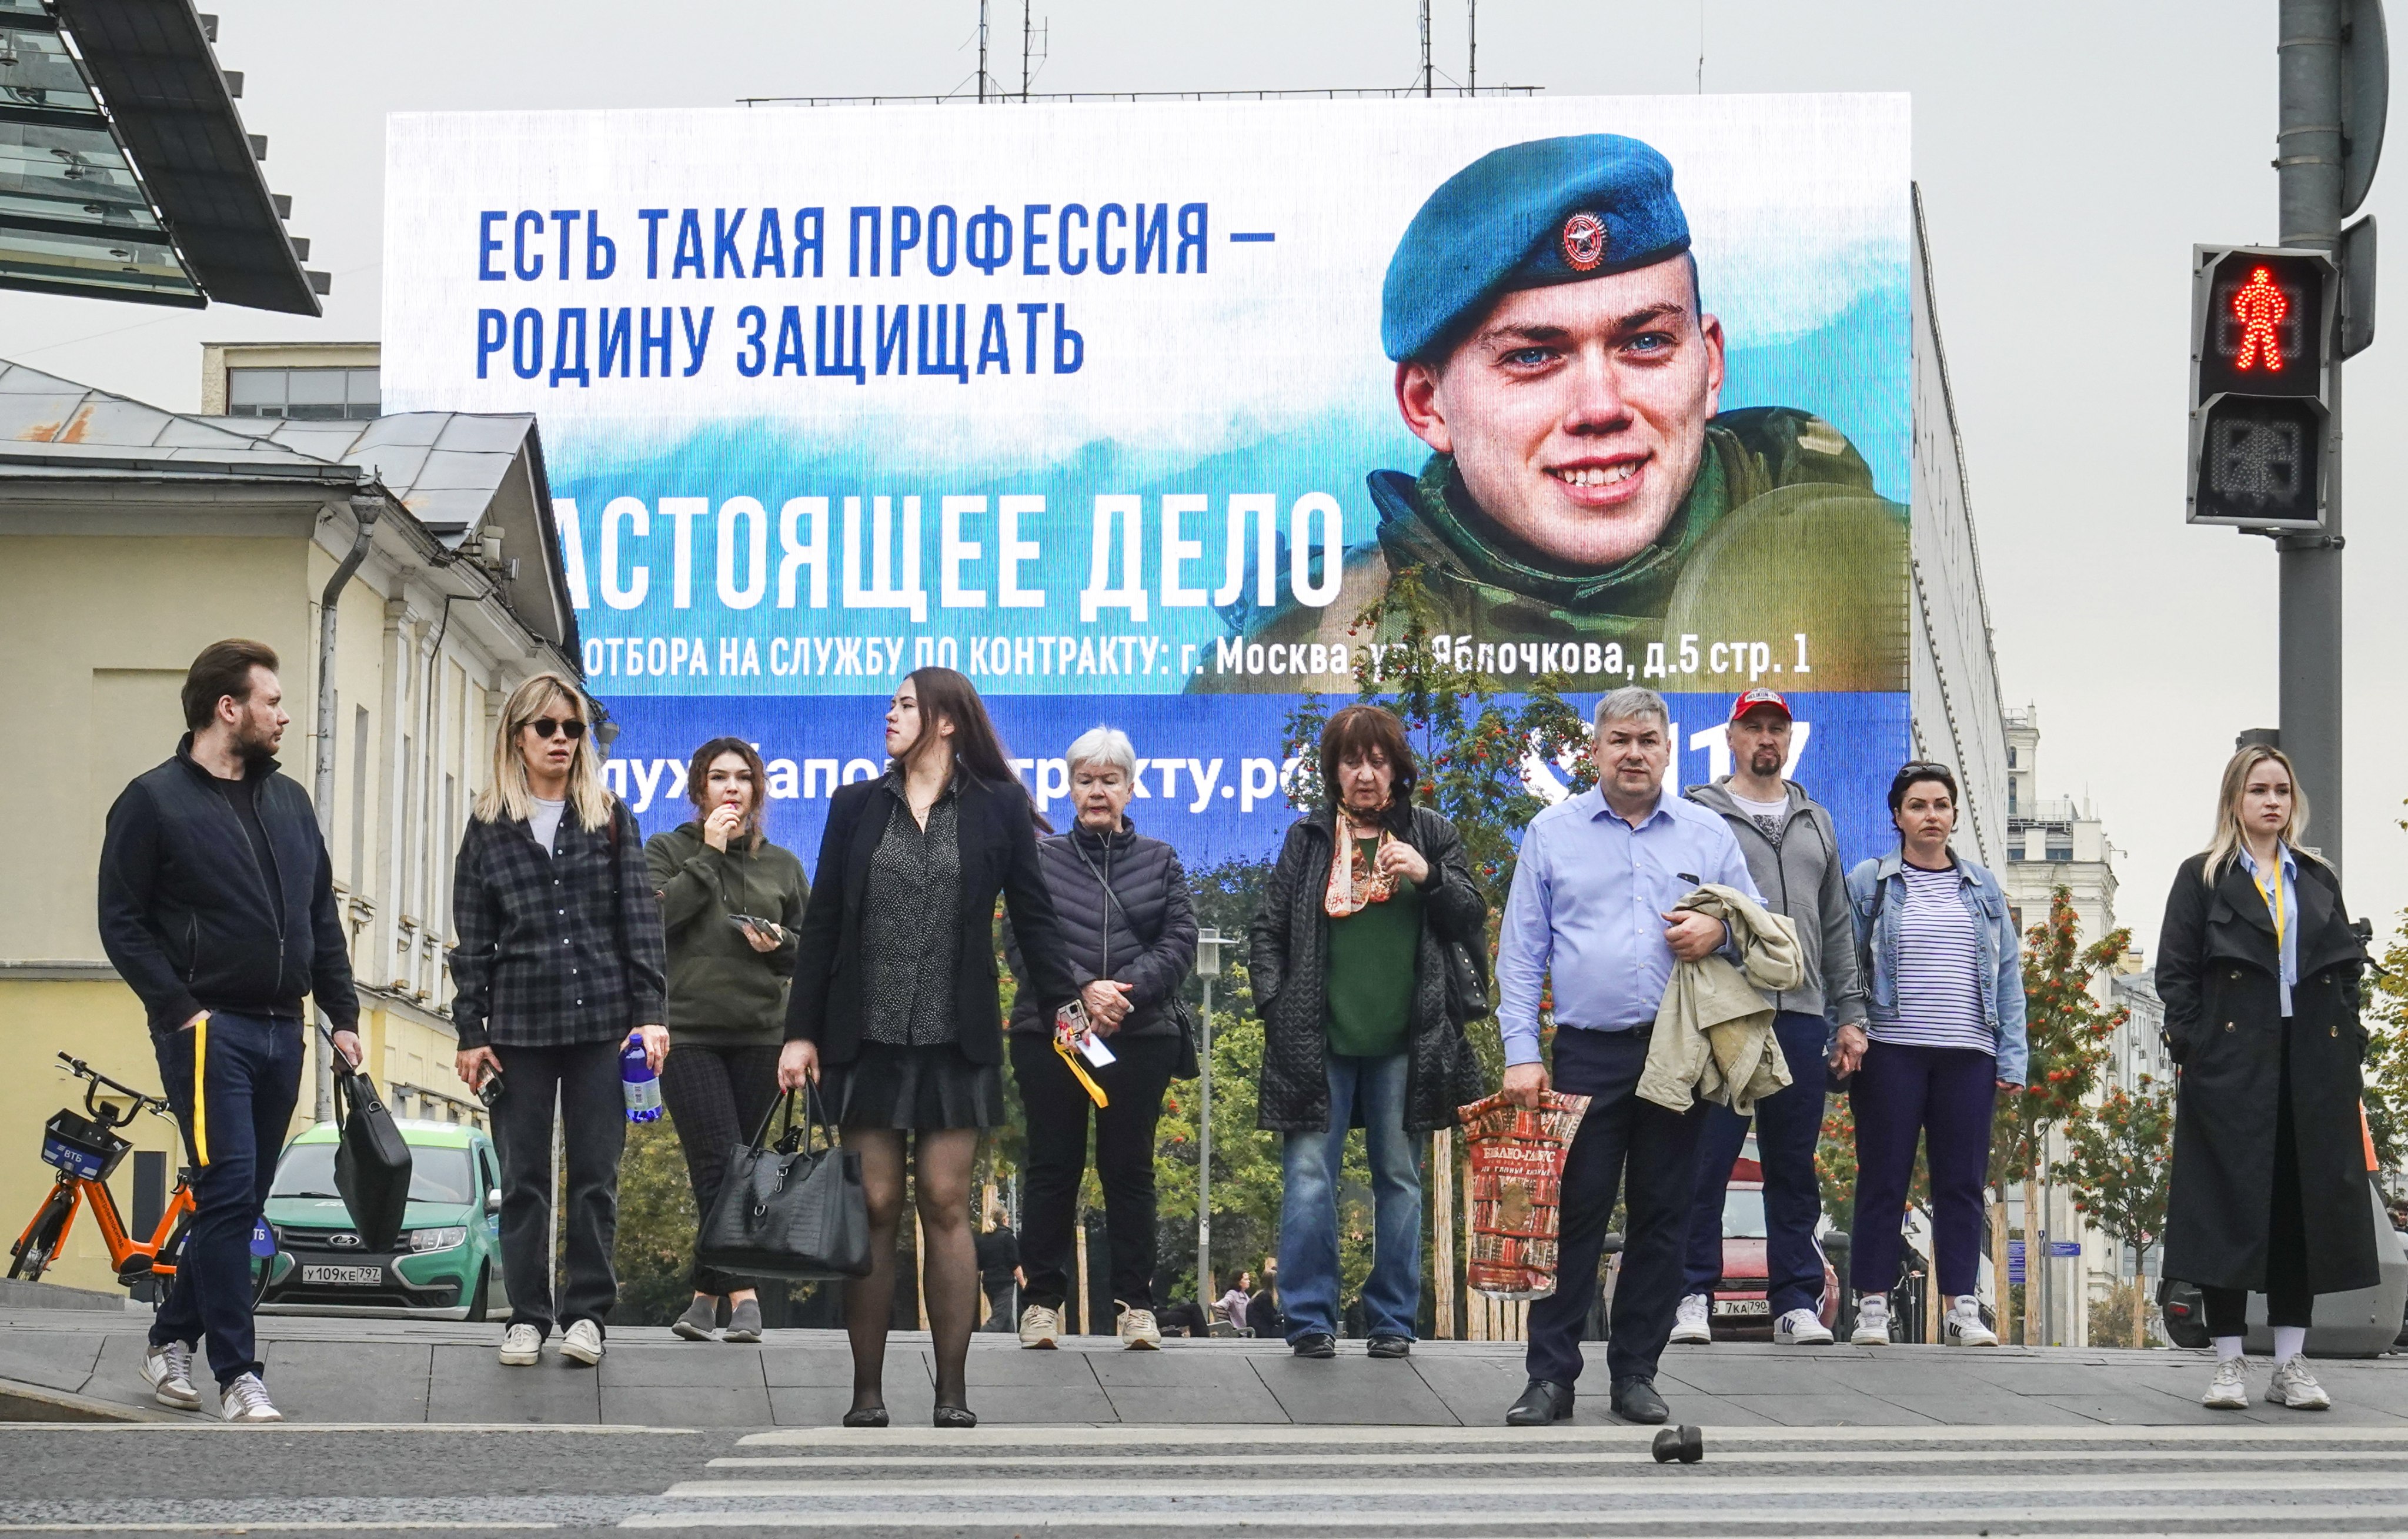 A military conscription billboard in Moscow. Russia said that it planned to raise defence spending by almost 70 per cent next year. Photo: EPA-EFE